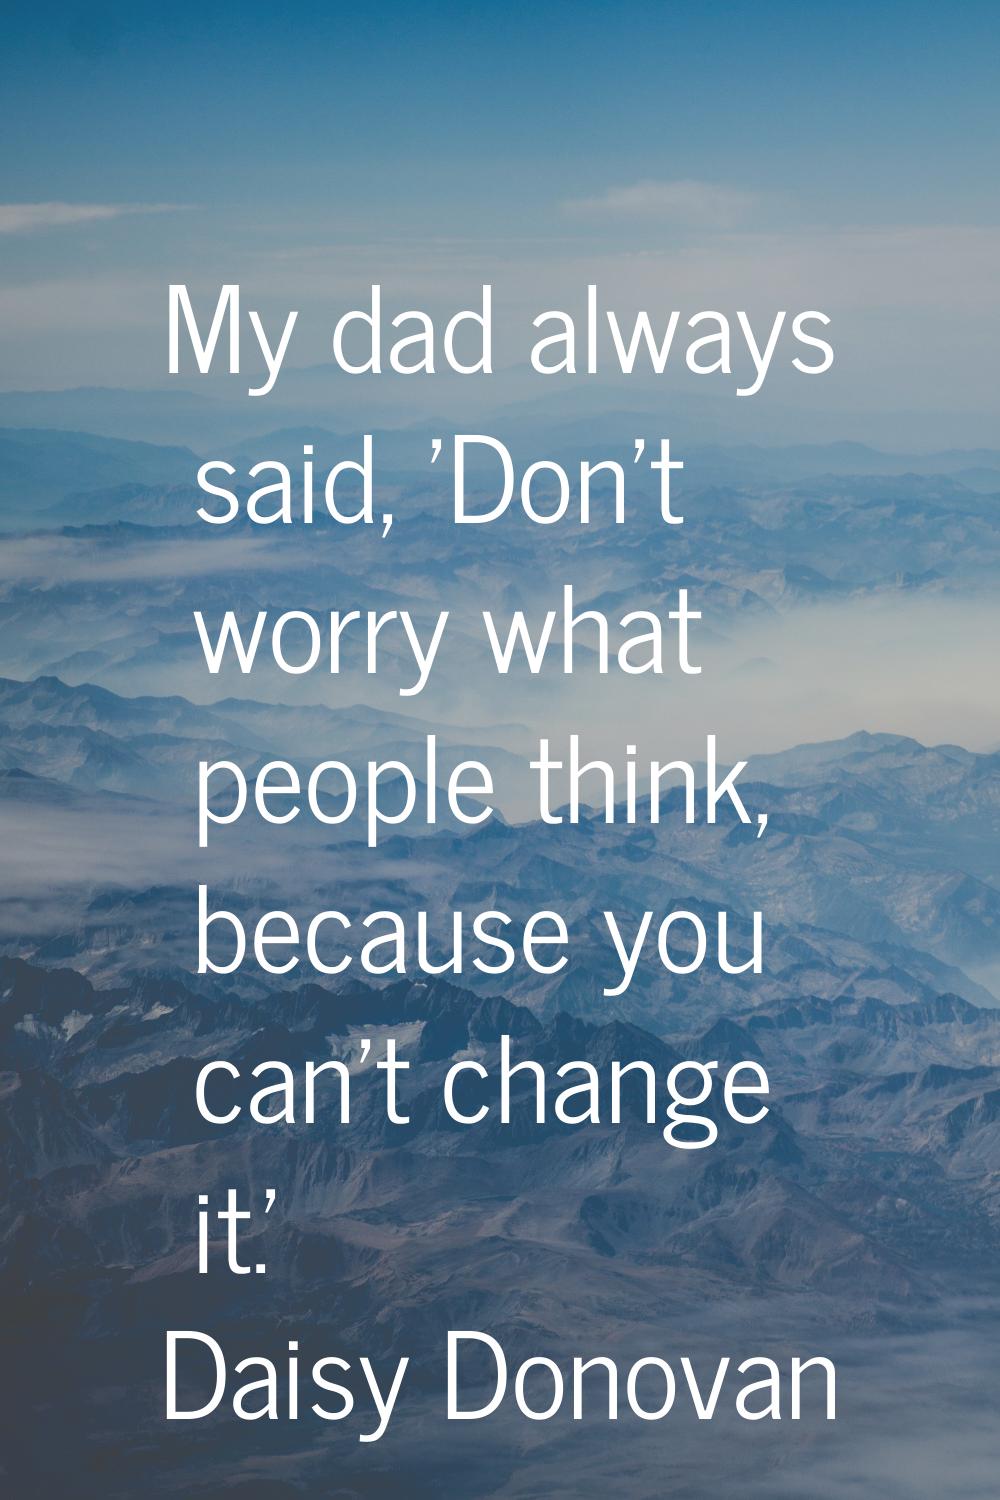 My dad always said, 'Don't worry what people think, because you can't change it.'